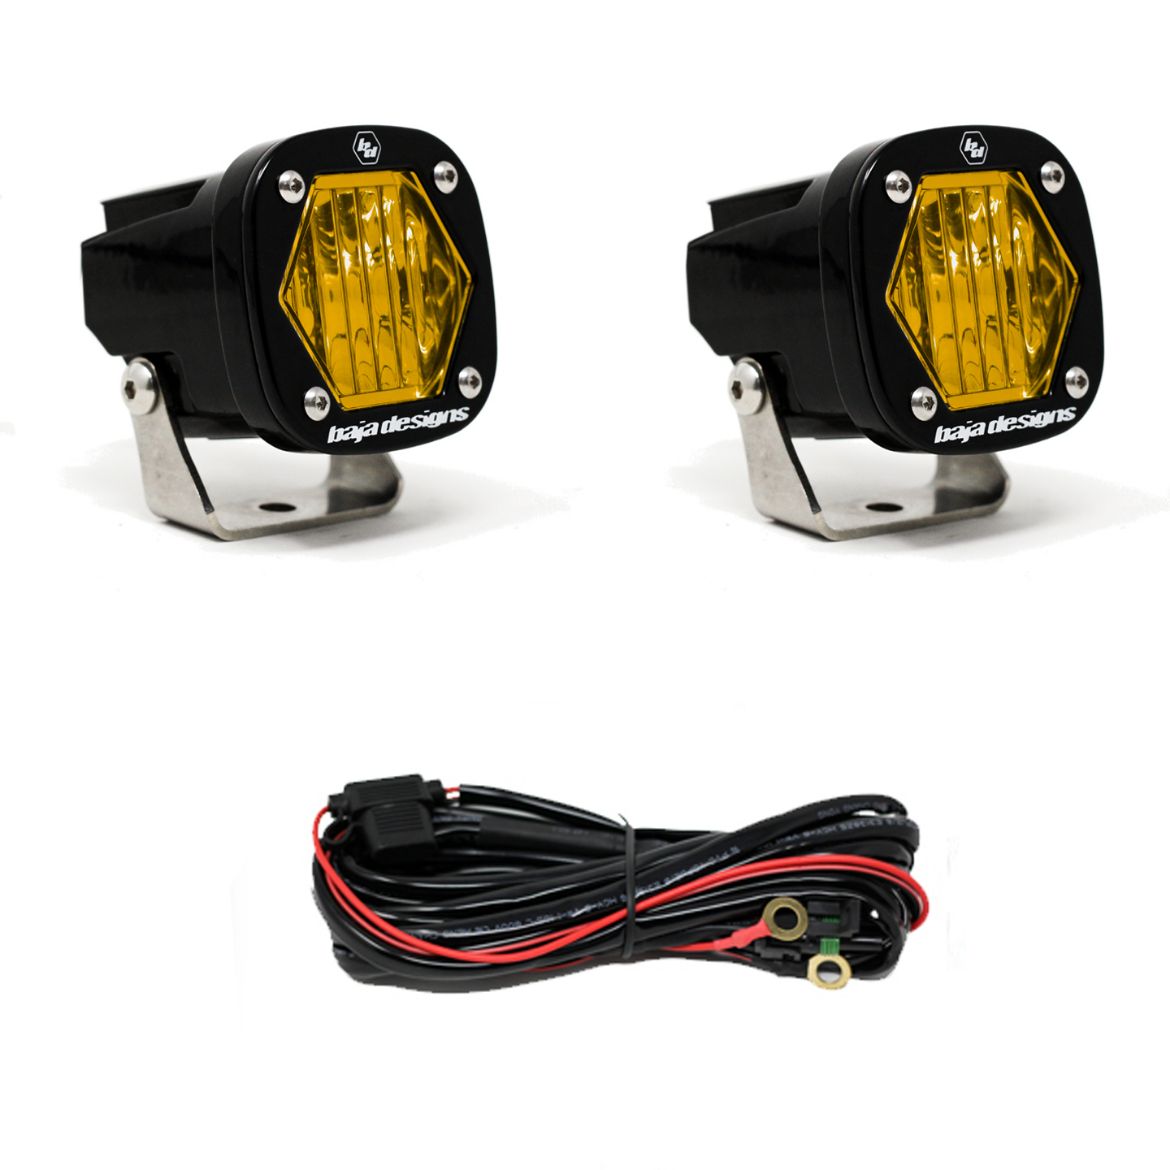 Picture of S1 Amber Wide Cornering LED Light with Mounting Bracket Pair Baja Designs